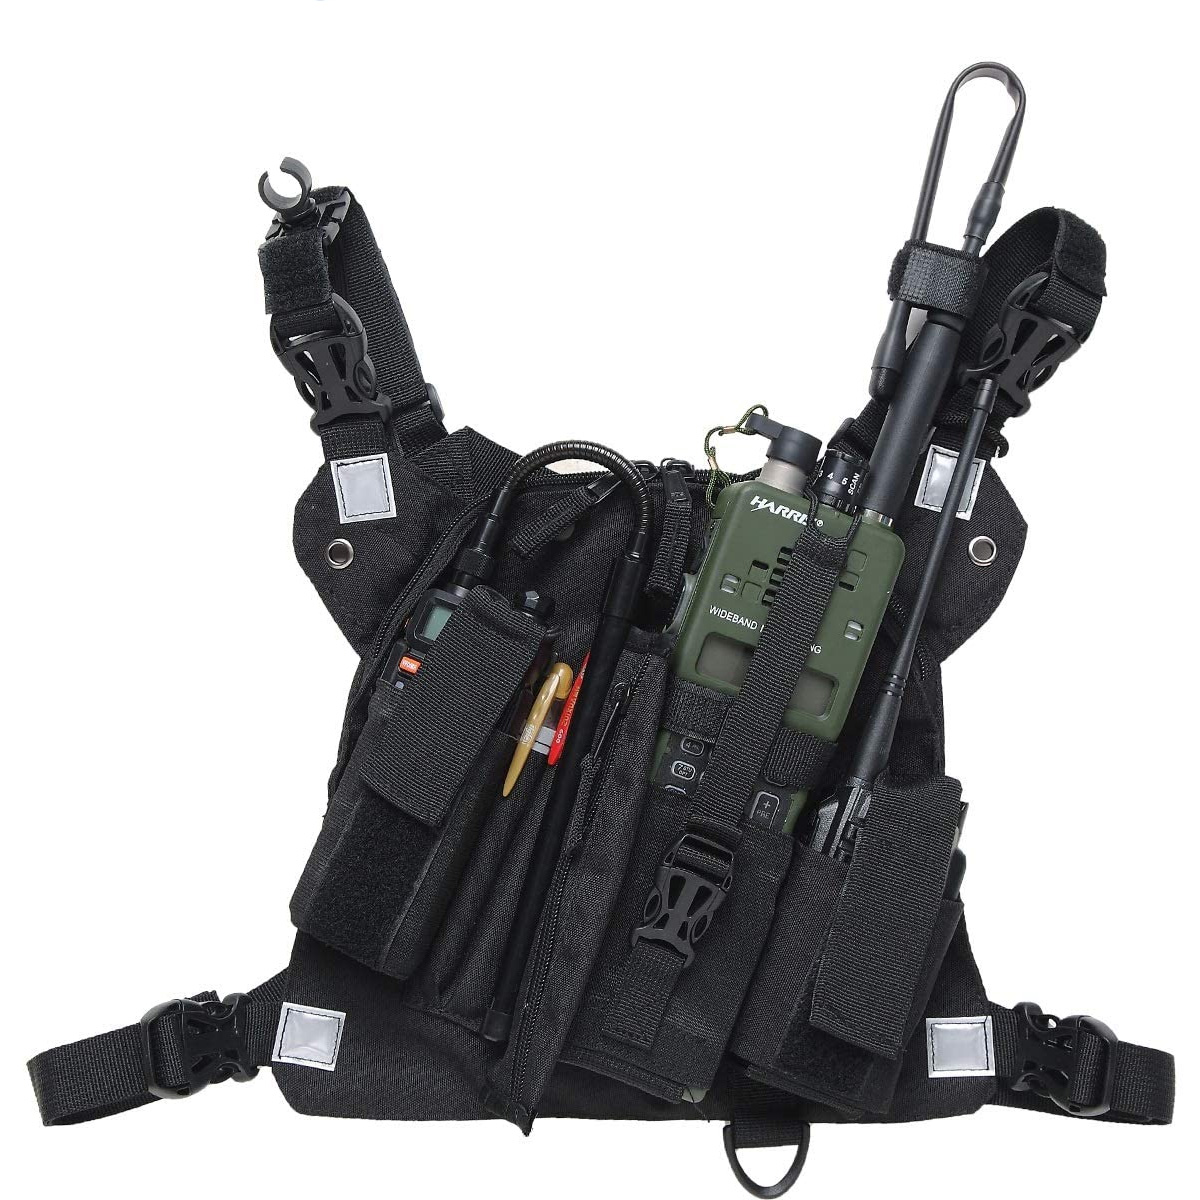 ABBREE-Walkie-Talkie-Tactical-Storage-Chest-Bag-Portable-Shoulder-Straps-Harness-Backpack-for-UV-5R--1893024-5